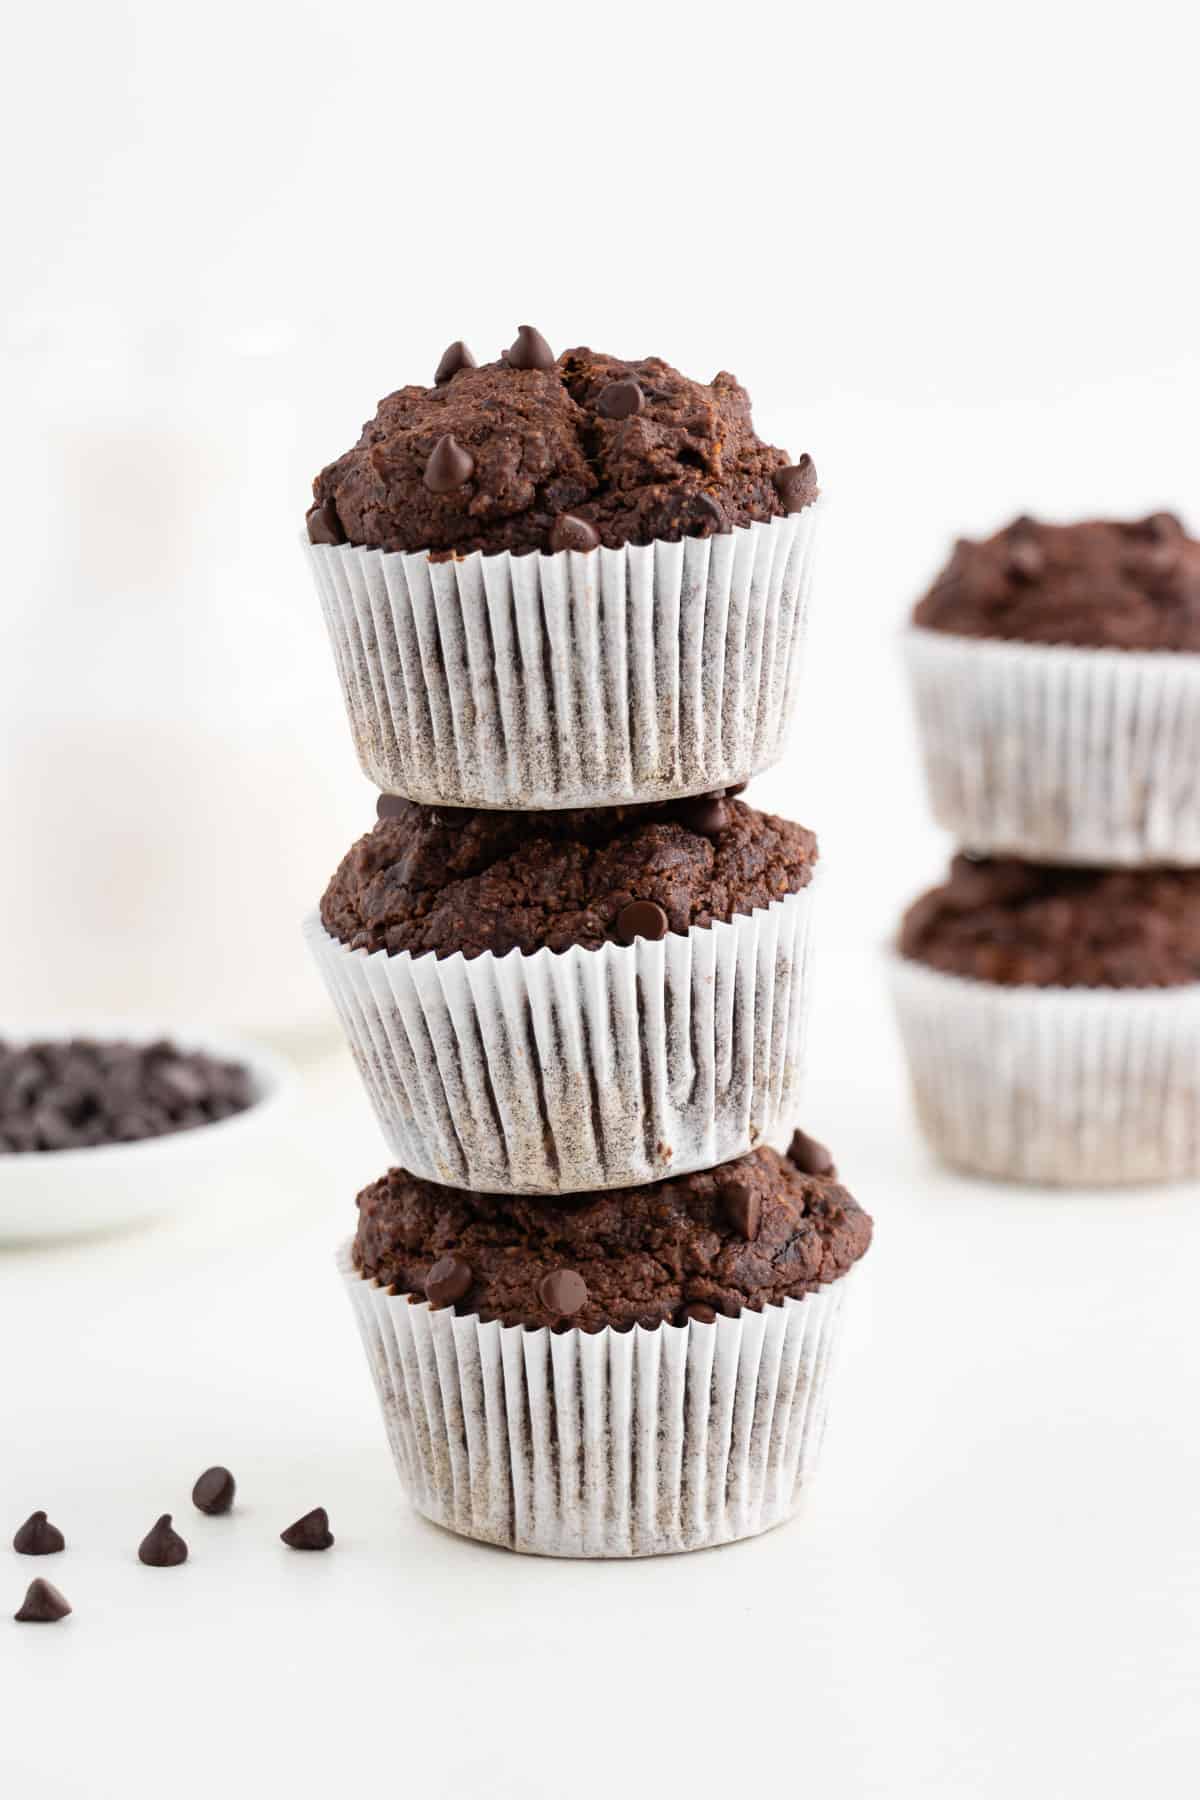 a stack of three vegan gluten-free double chocolate banana muffins in front of a glass of almond milk and bowl of chocolate chips